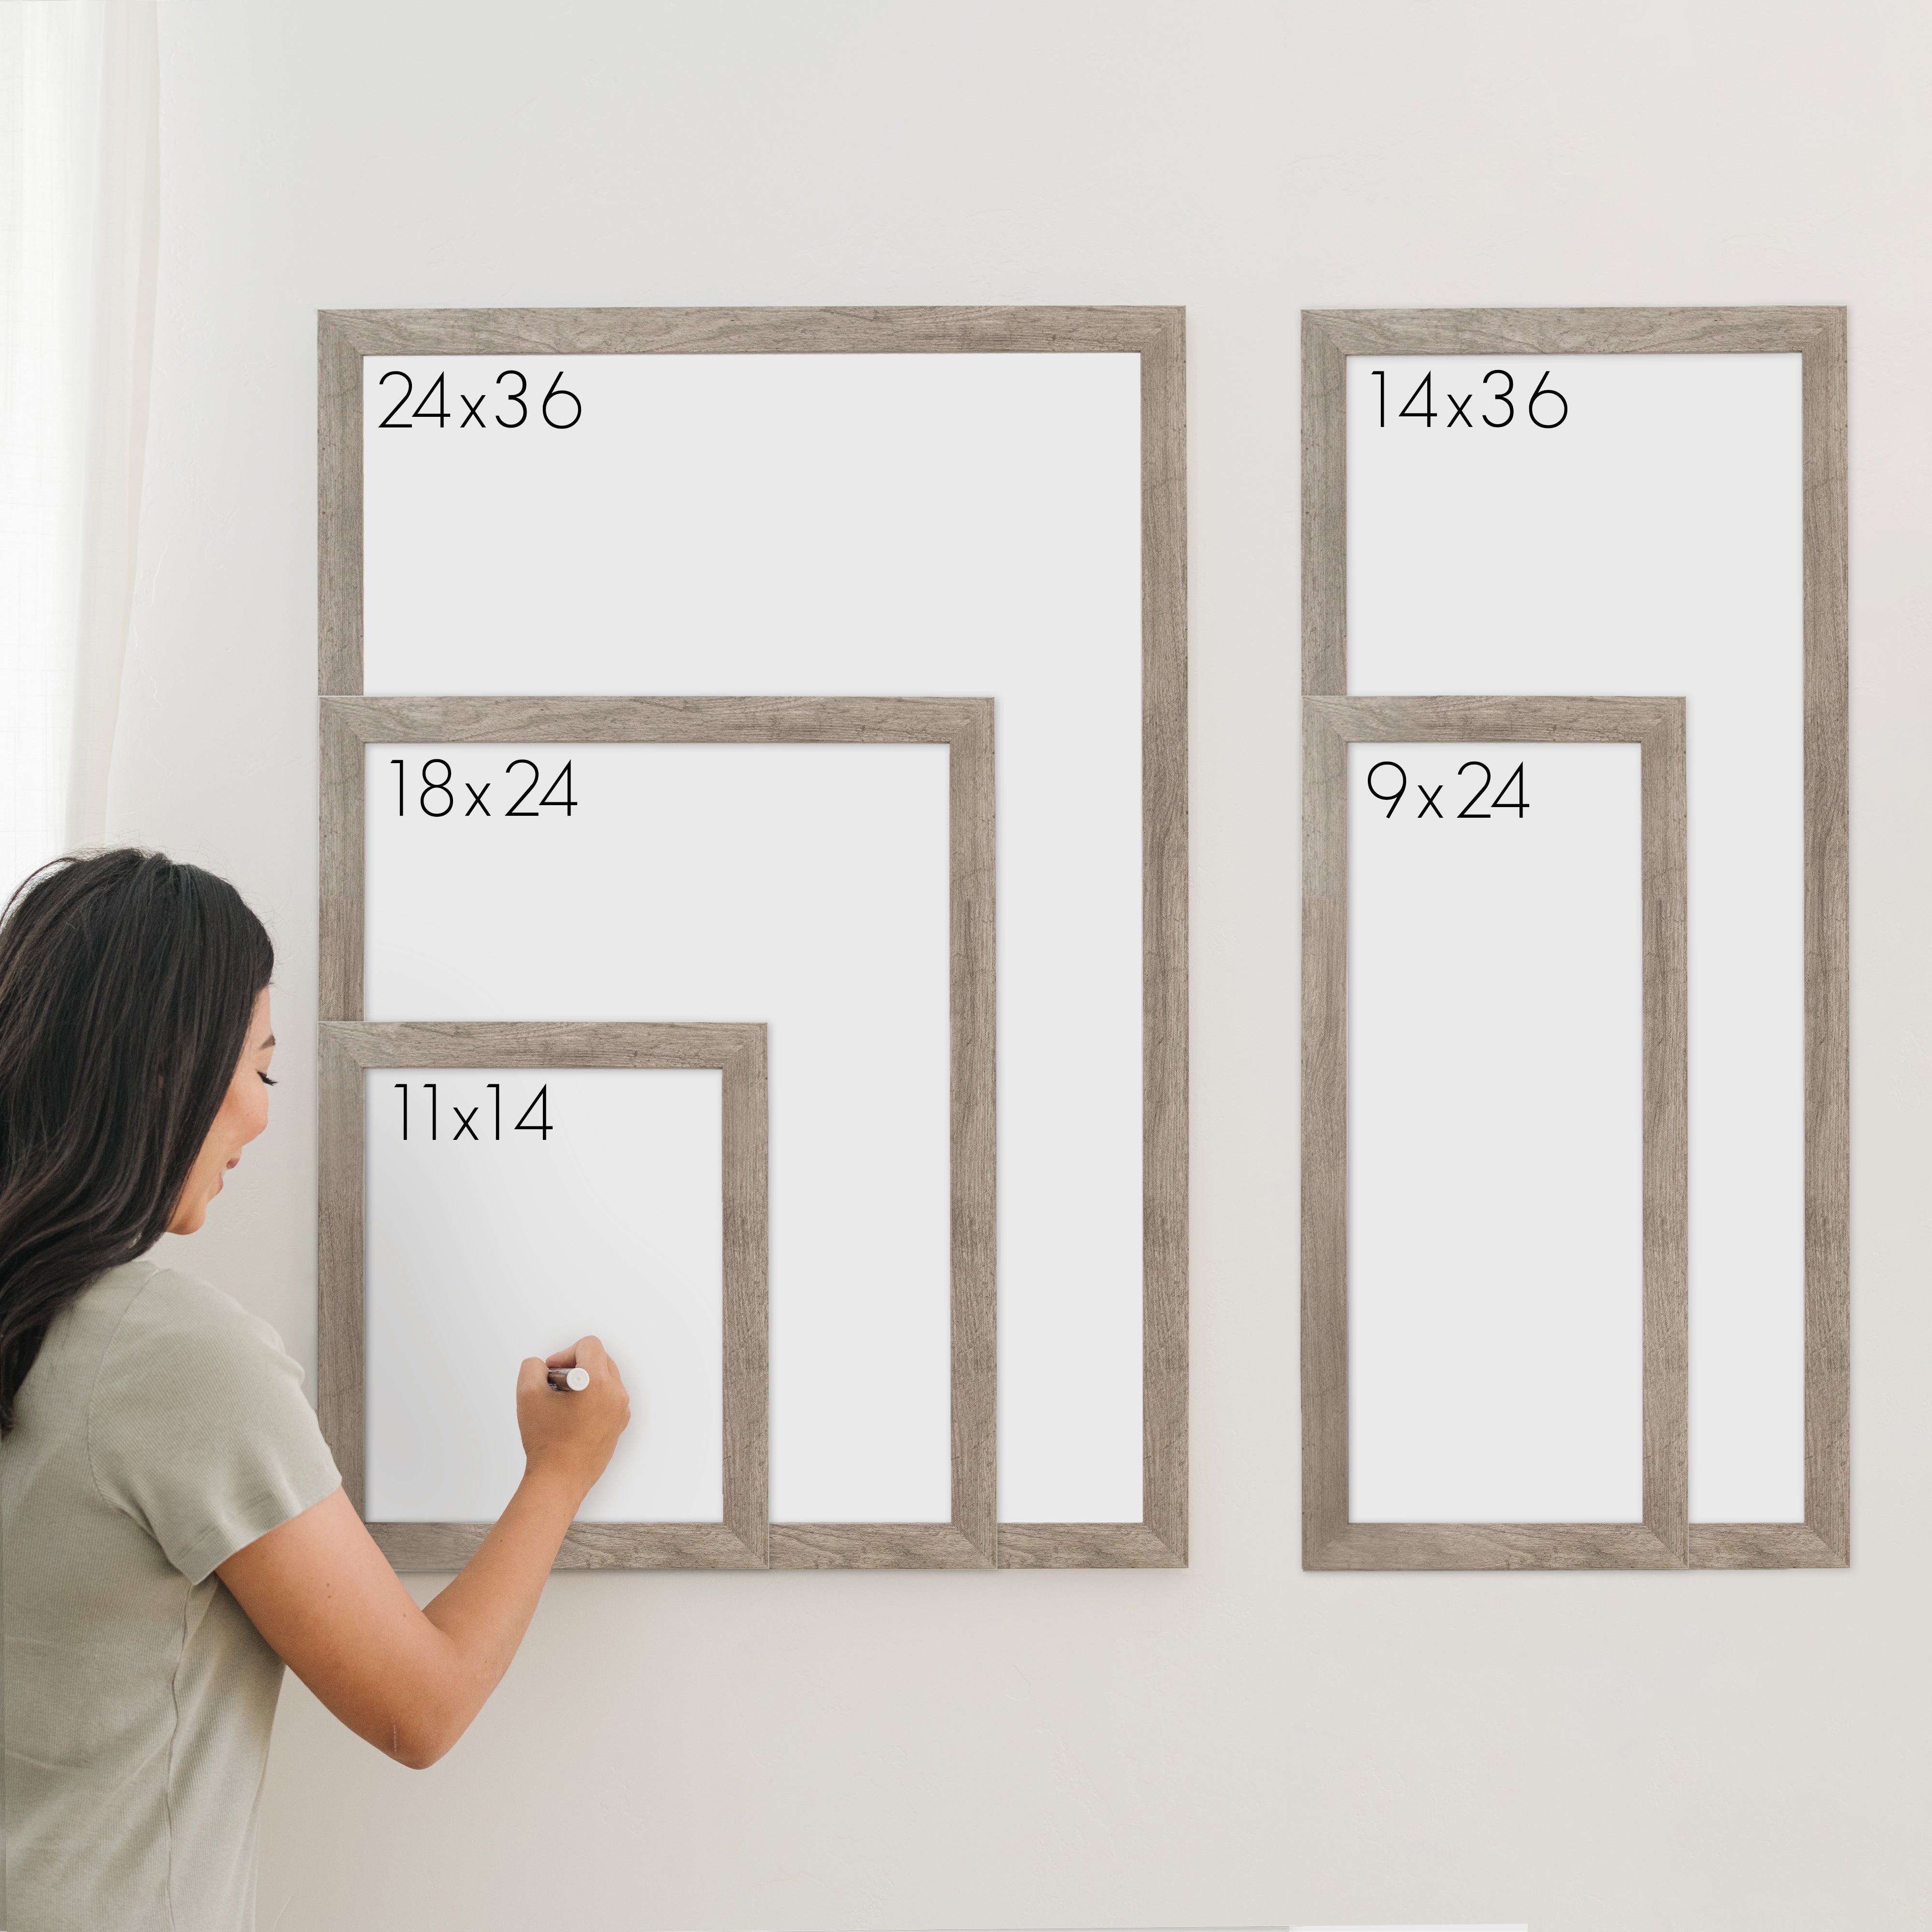 Week & Month Combo Framed Chalkboard + 6 sections | Vertical Swanson